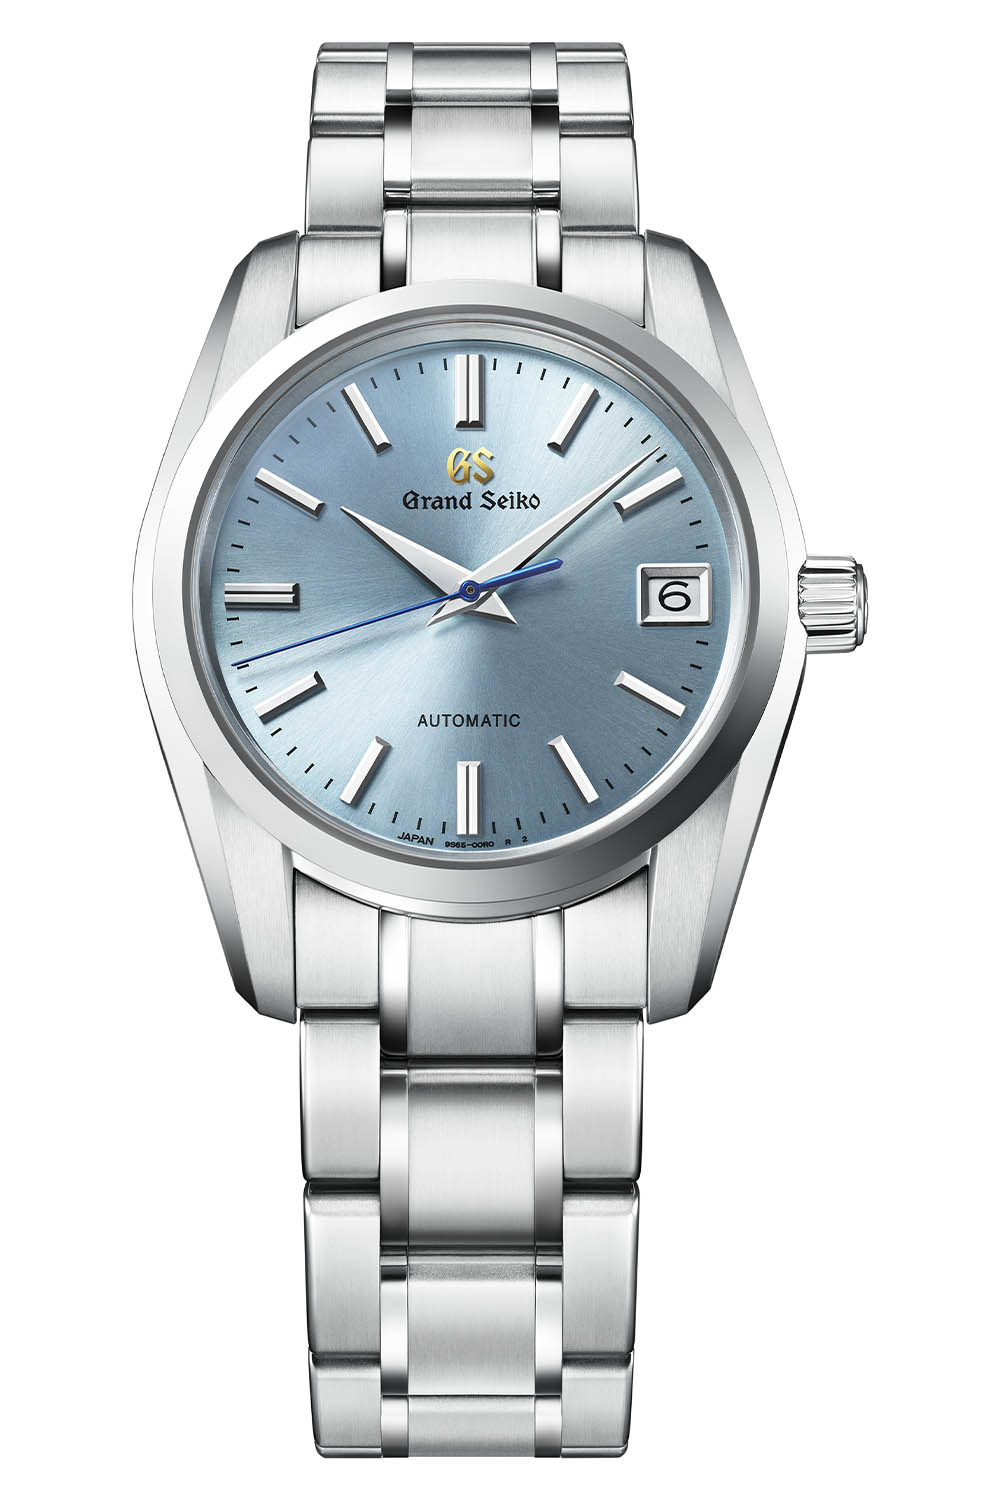 Grand Seiko Heritage Collection Calibre 9S 25th Anniversary Limited Edition  Watches (SBGH311 & SBGR325)